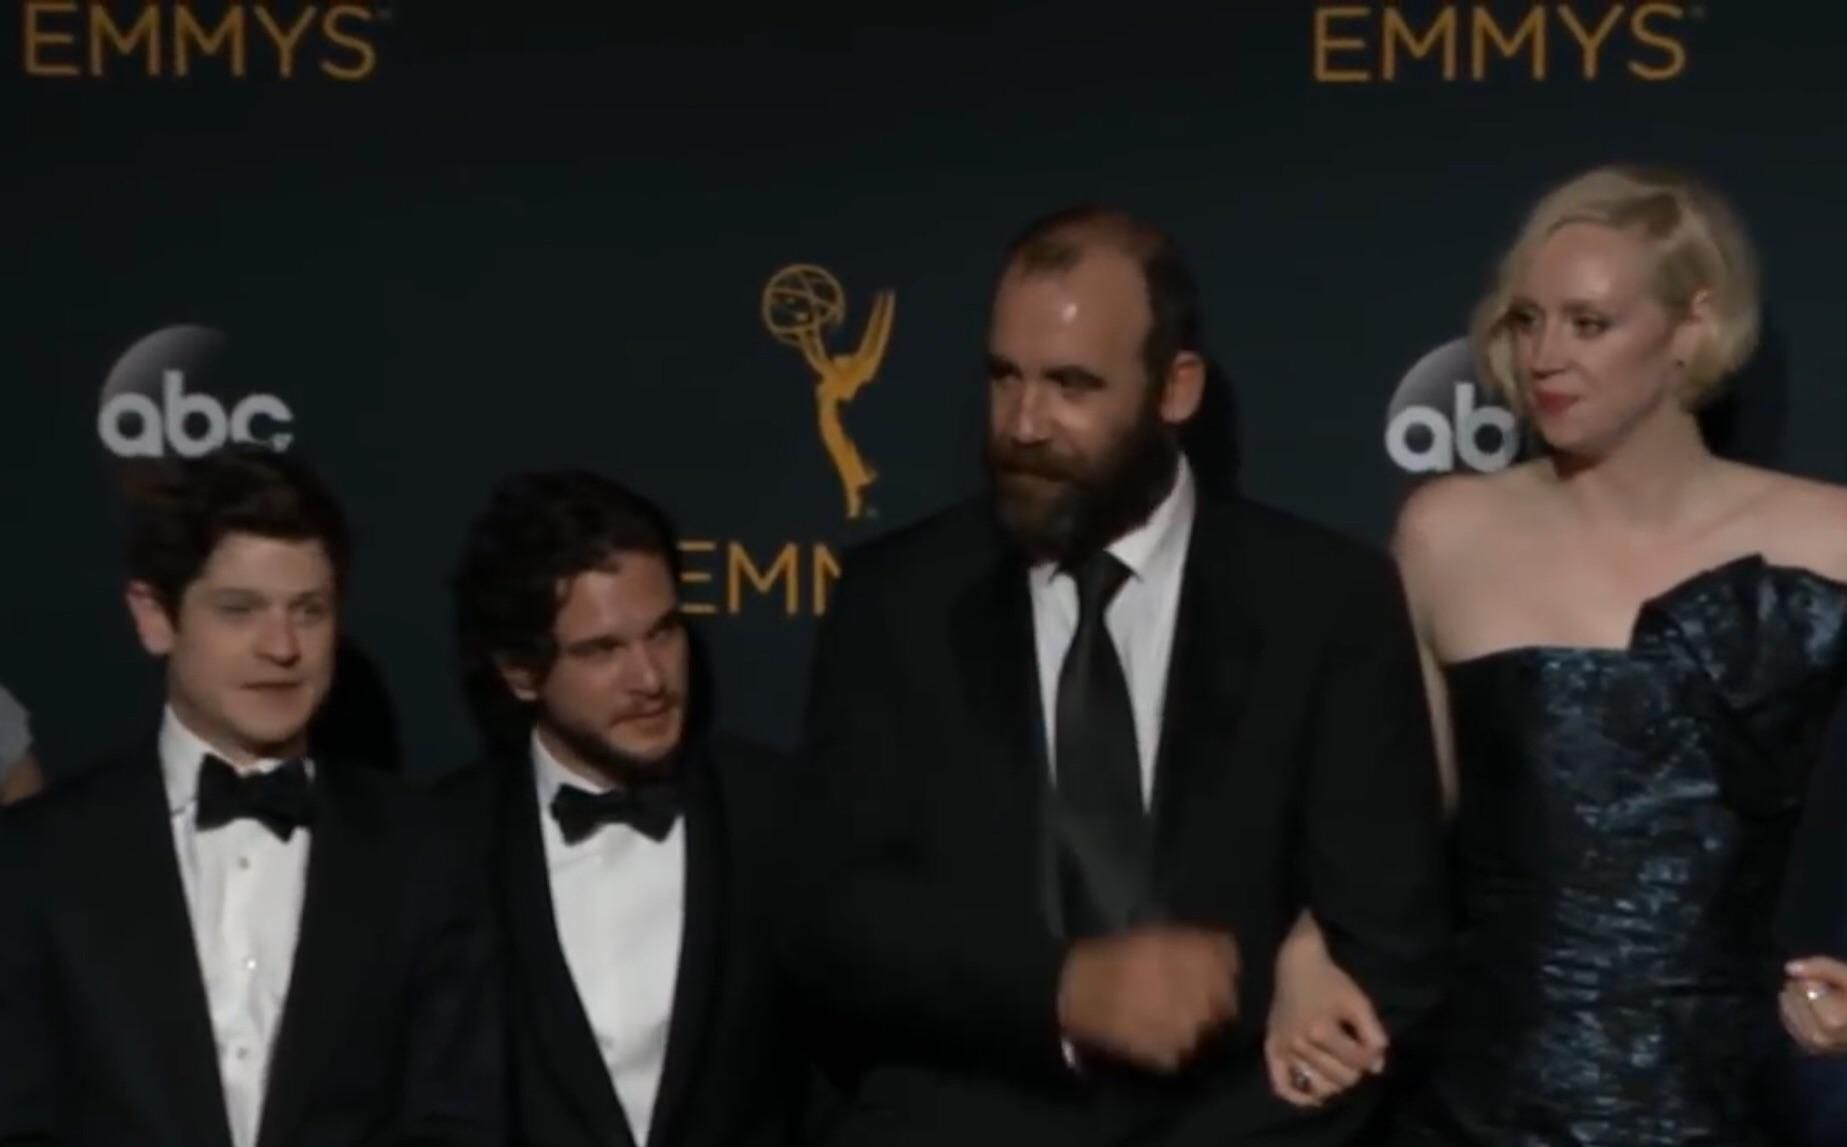 Husband and wife take their 2 boys to the Emmys.